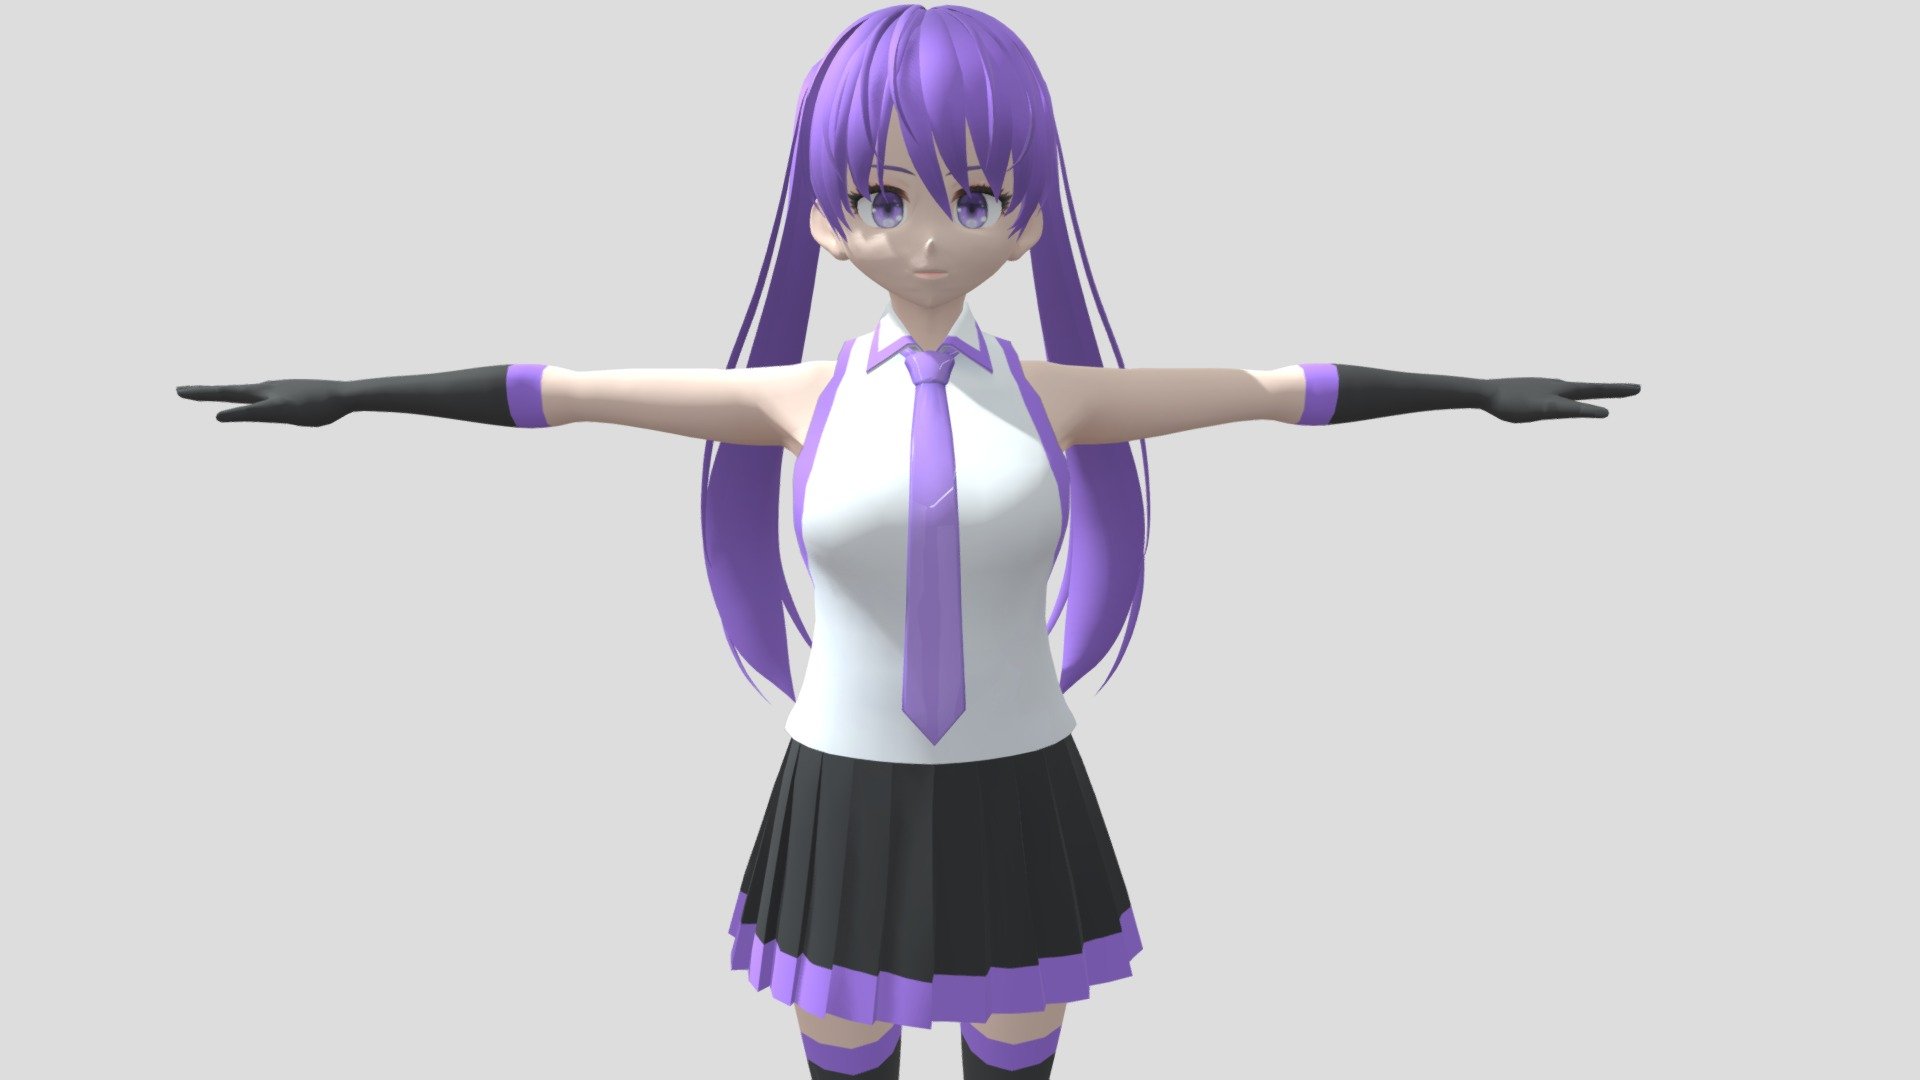 Model preview



This character model belongs to Japanese anime style, all models has been converted into fbx file using blender, users can add their favorite animations on mixamo website, then apply to unity versions above 2019



Character : Idol:DarkFukka

Verts:24849

Tris:35135

Fourteen textures for the character



This package contains VRM files, which can make the character module more refined, please refer to the manual for details



▶Commercial use allowed

▶Forbid secondary sales



Welcome add my website to credit :

Sketchfab

Pixiv

VRoidHub
 - 【Anime Character / alex94i60】Idol:Fukka (V2) - Buy Royalty Free 3D model by 3D動漫風角色屋 / 3D Anime Character Store (@alex94i60) 3d model